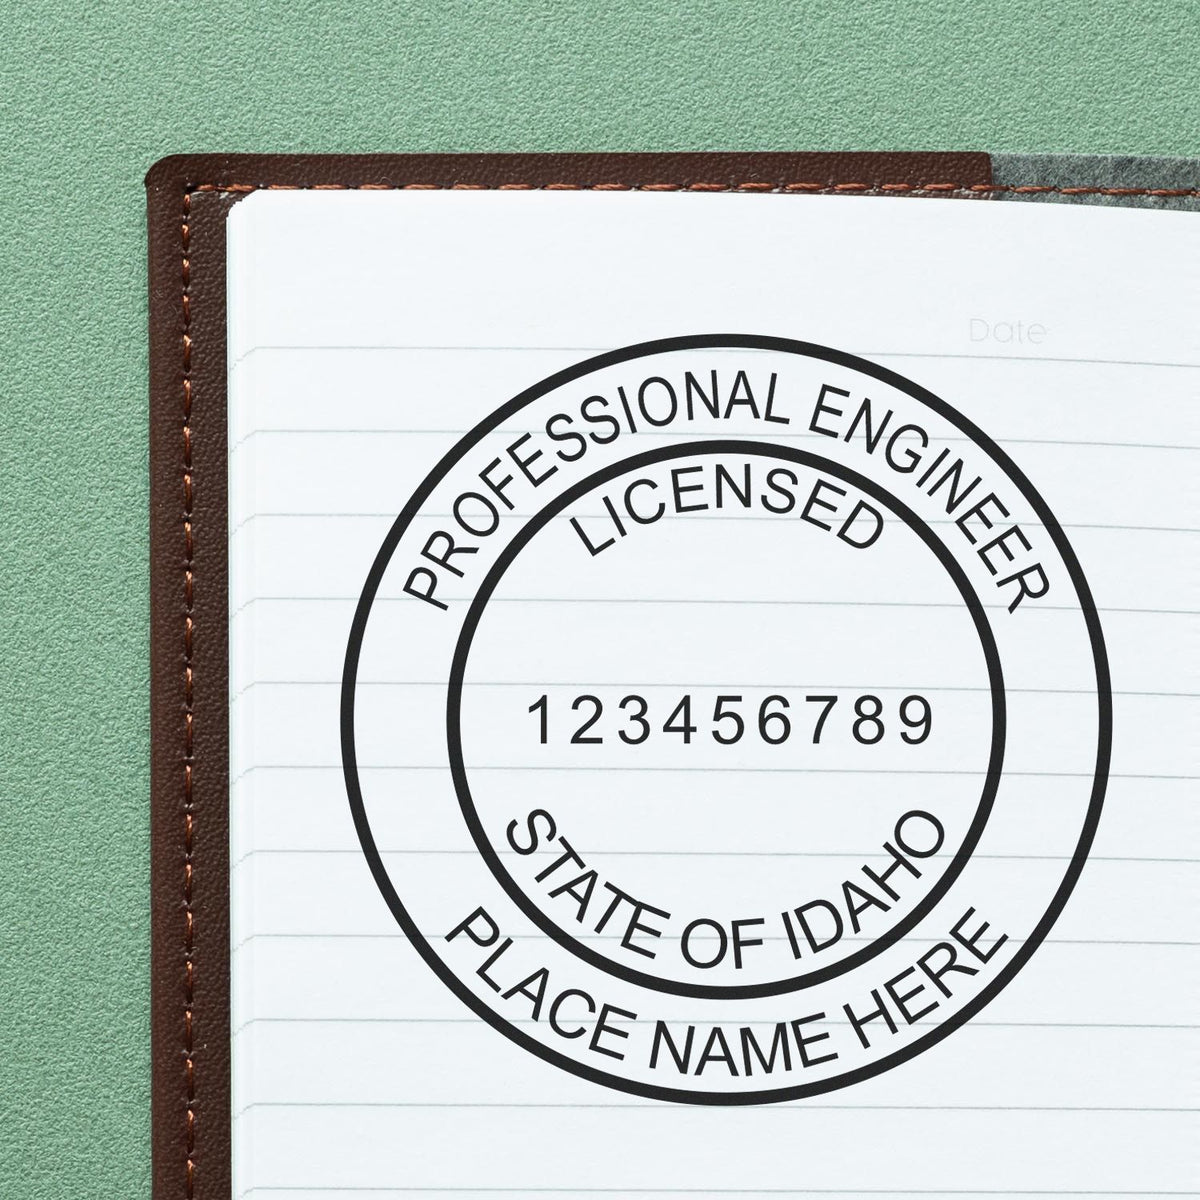 Another Example of a stamped impression of the Idaho Professional Engineer Seal Stamp on a piece of office paper.